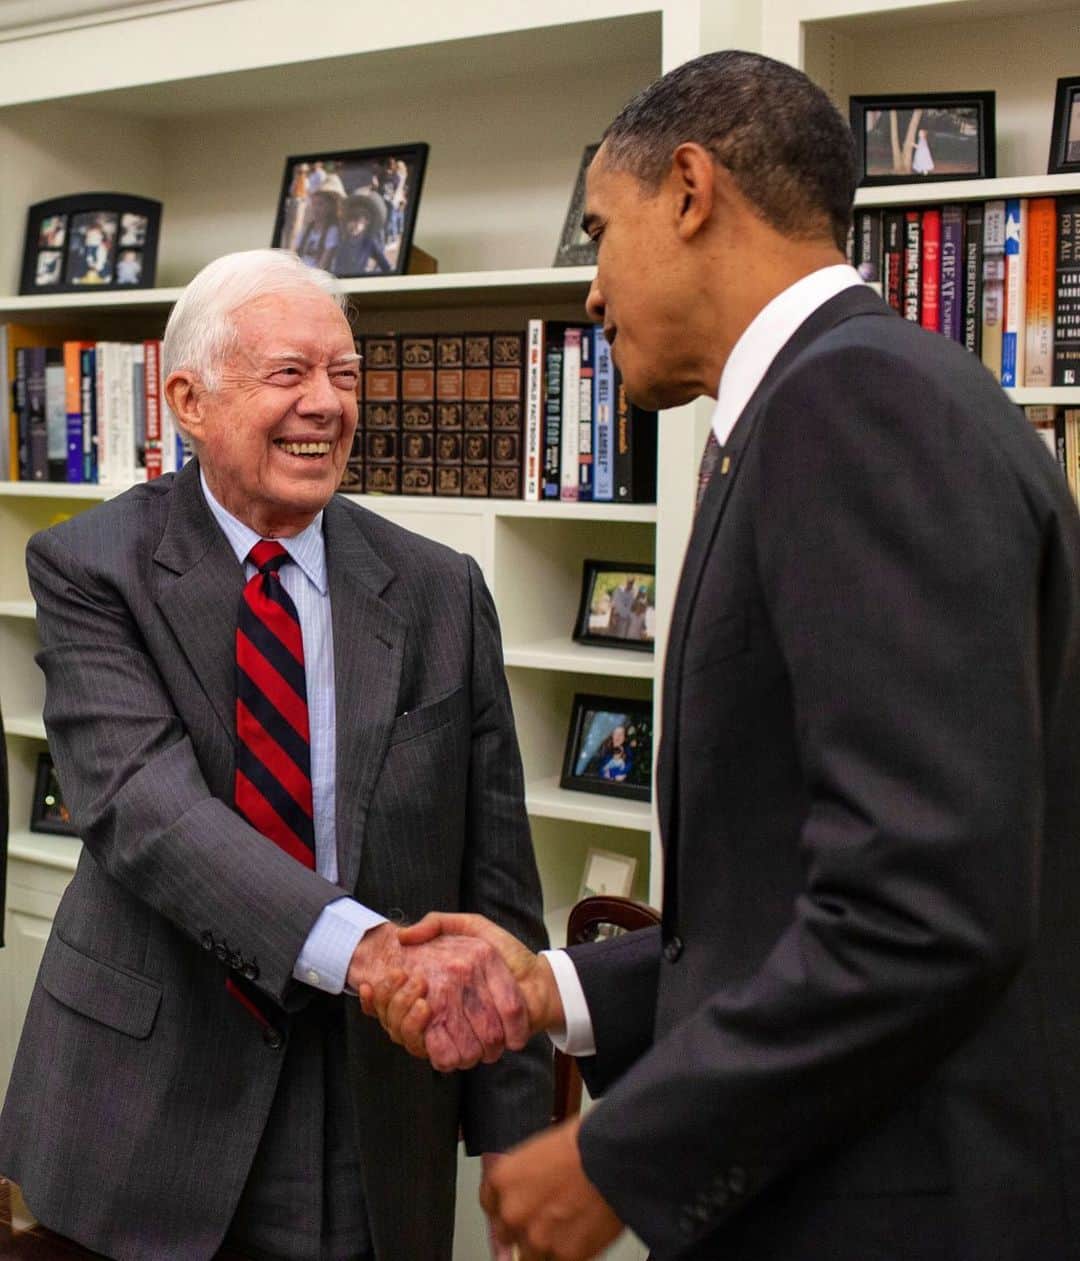 Barack Obamaのインスタグラム：「Happy 99th birthday, President Carter! You’ve inspired so many people around the world with your leadership, character, and commitment to service. Michelle and I hope you have a wonderful birthday and send our best wishes to you and Rosalynn.」